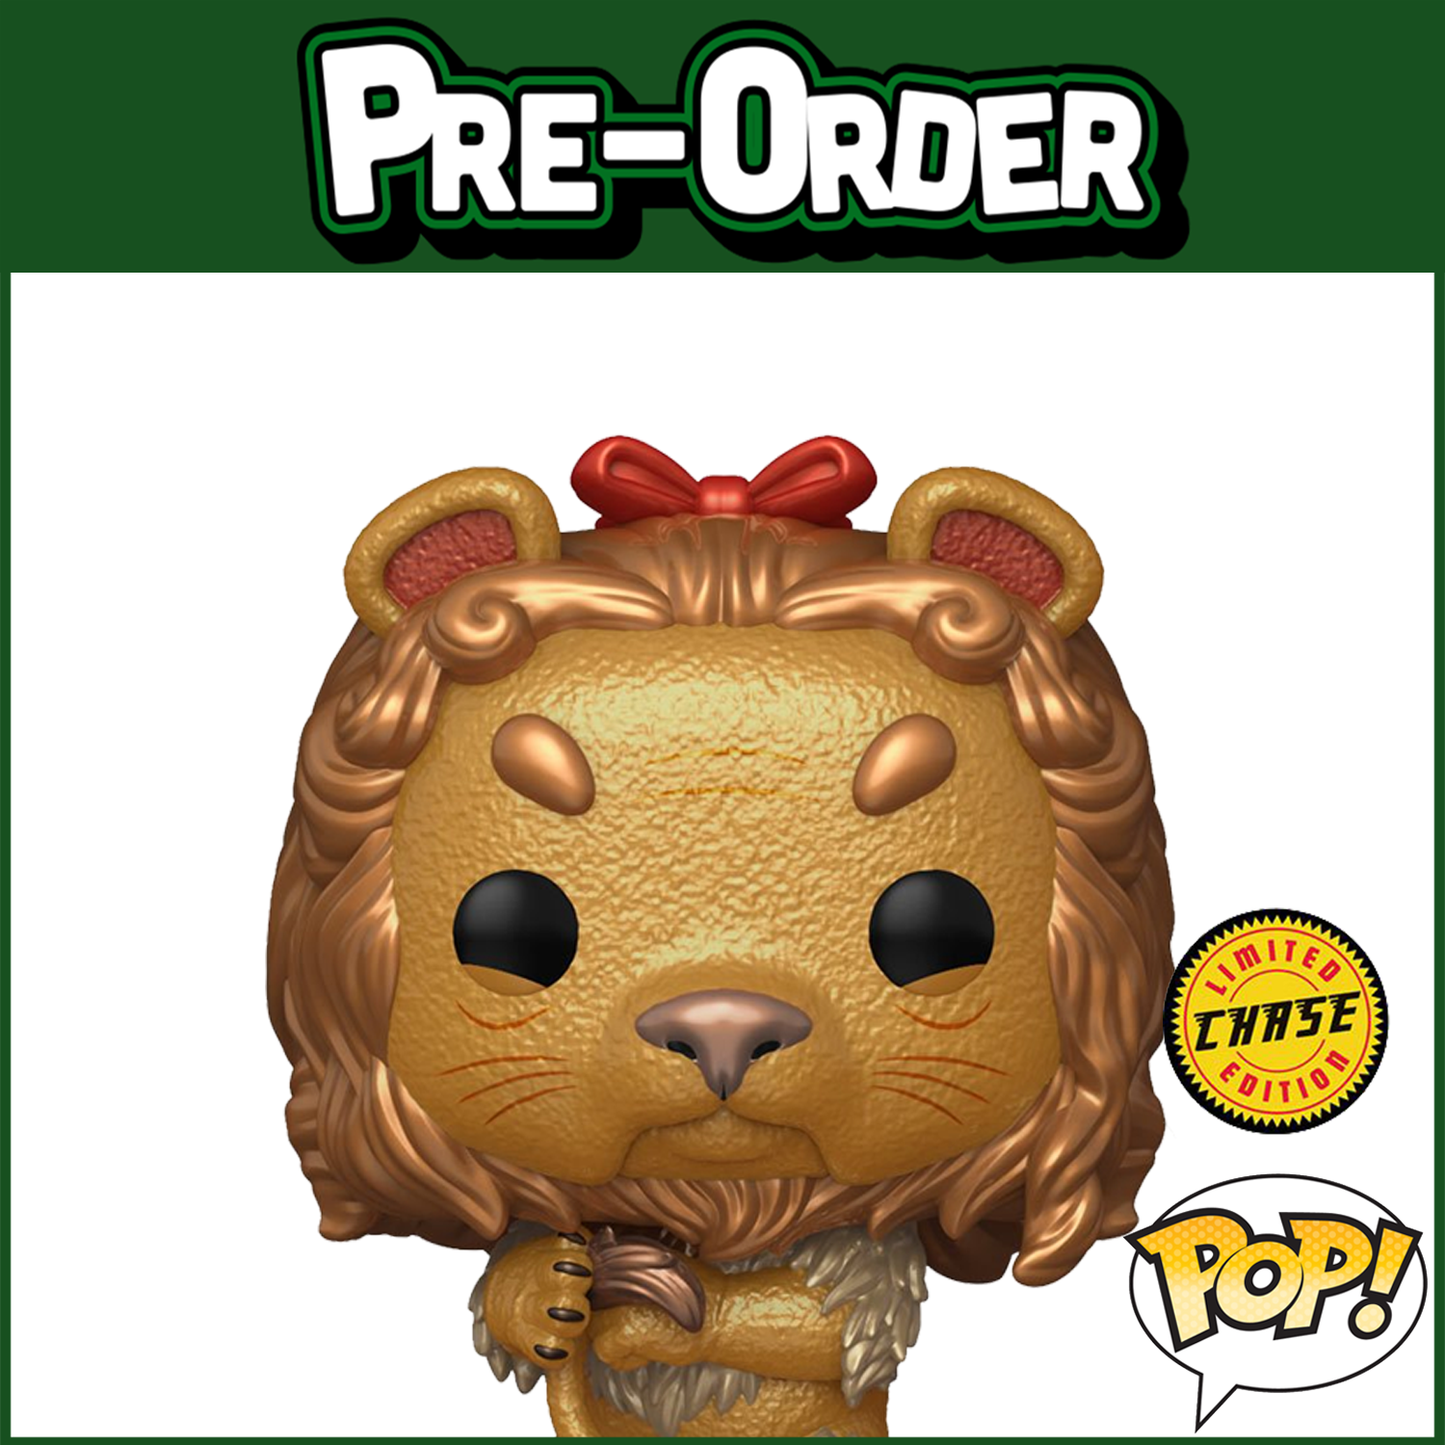 (PRE-ORDER) Funko POP! Movies: The Wizard of Oz 85th - Cowardly Lion CHASE #1515